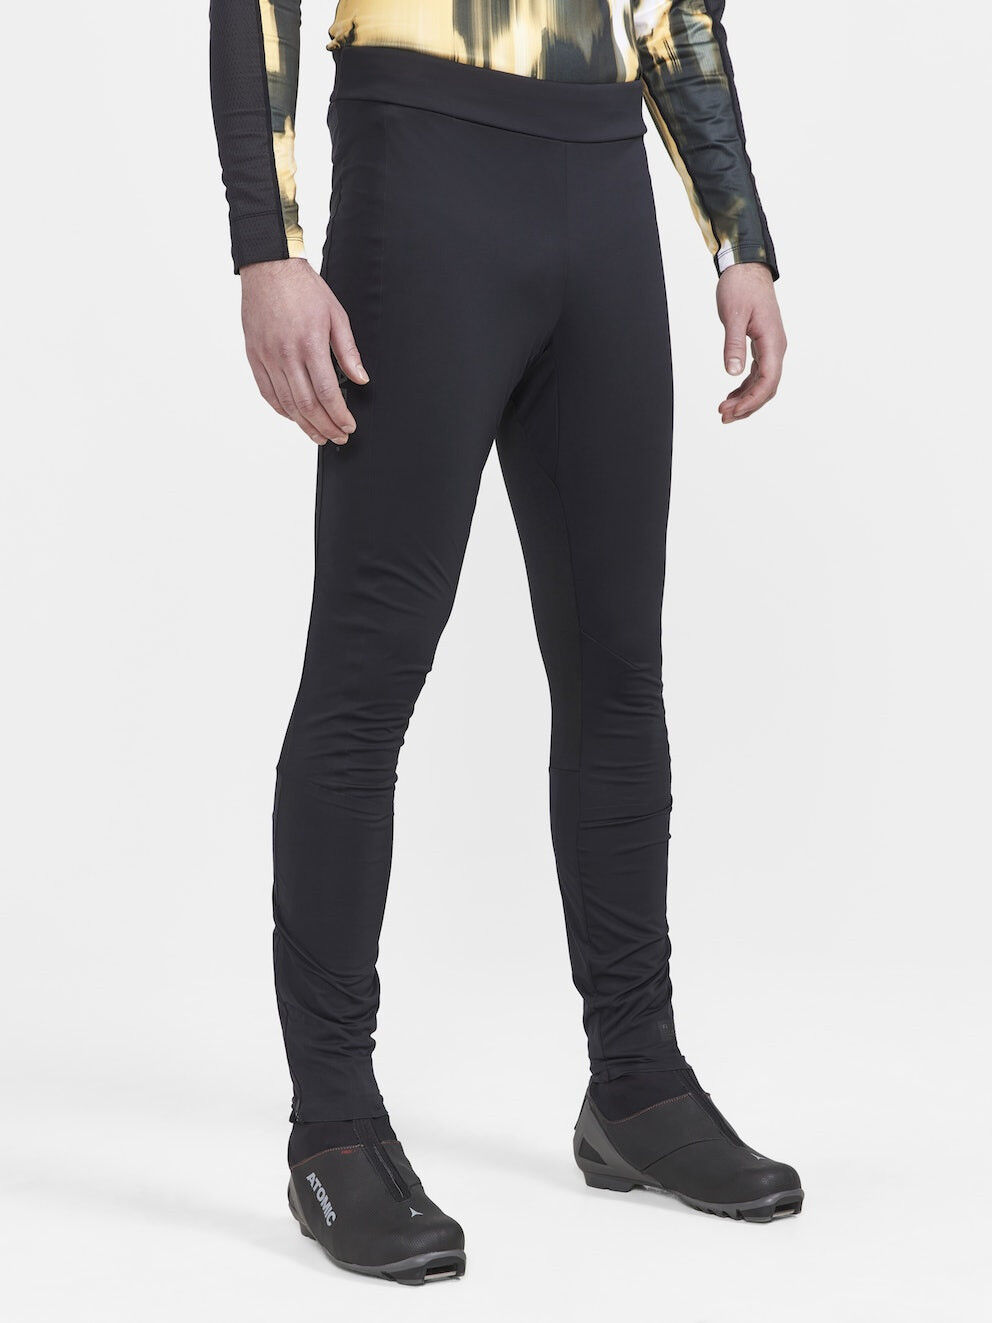 Craft NOR Pro Nordic Race Wind Tight - Cross-country ski trousers - Men's | Hardloop